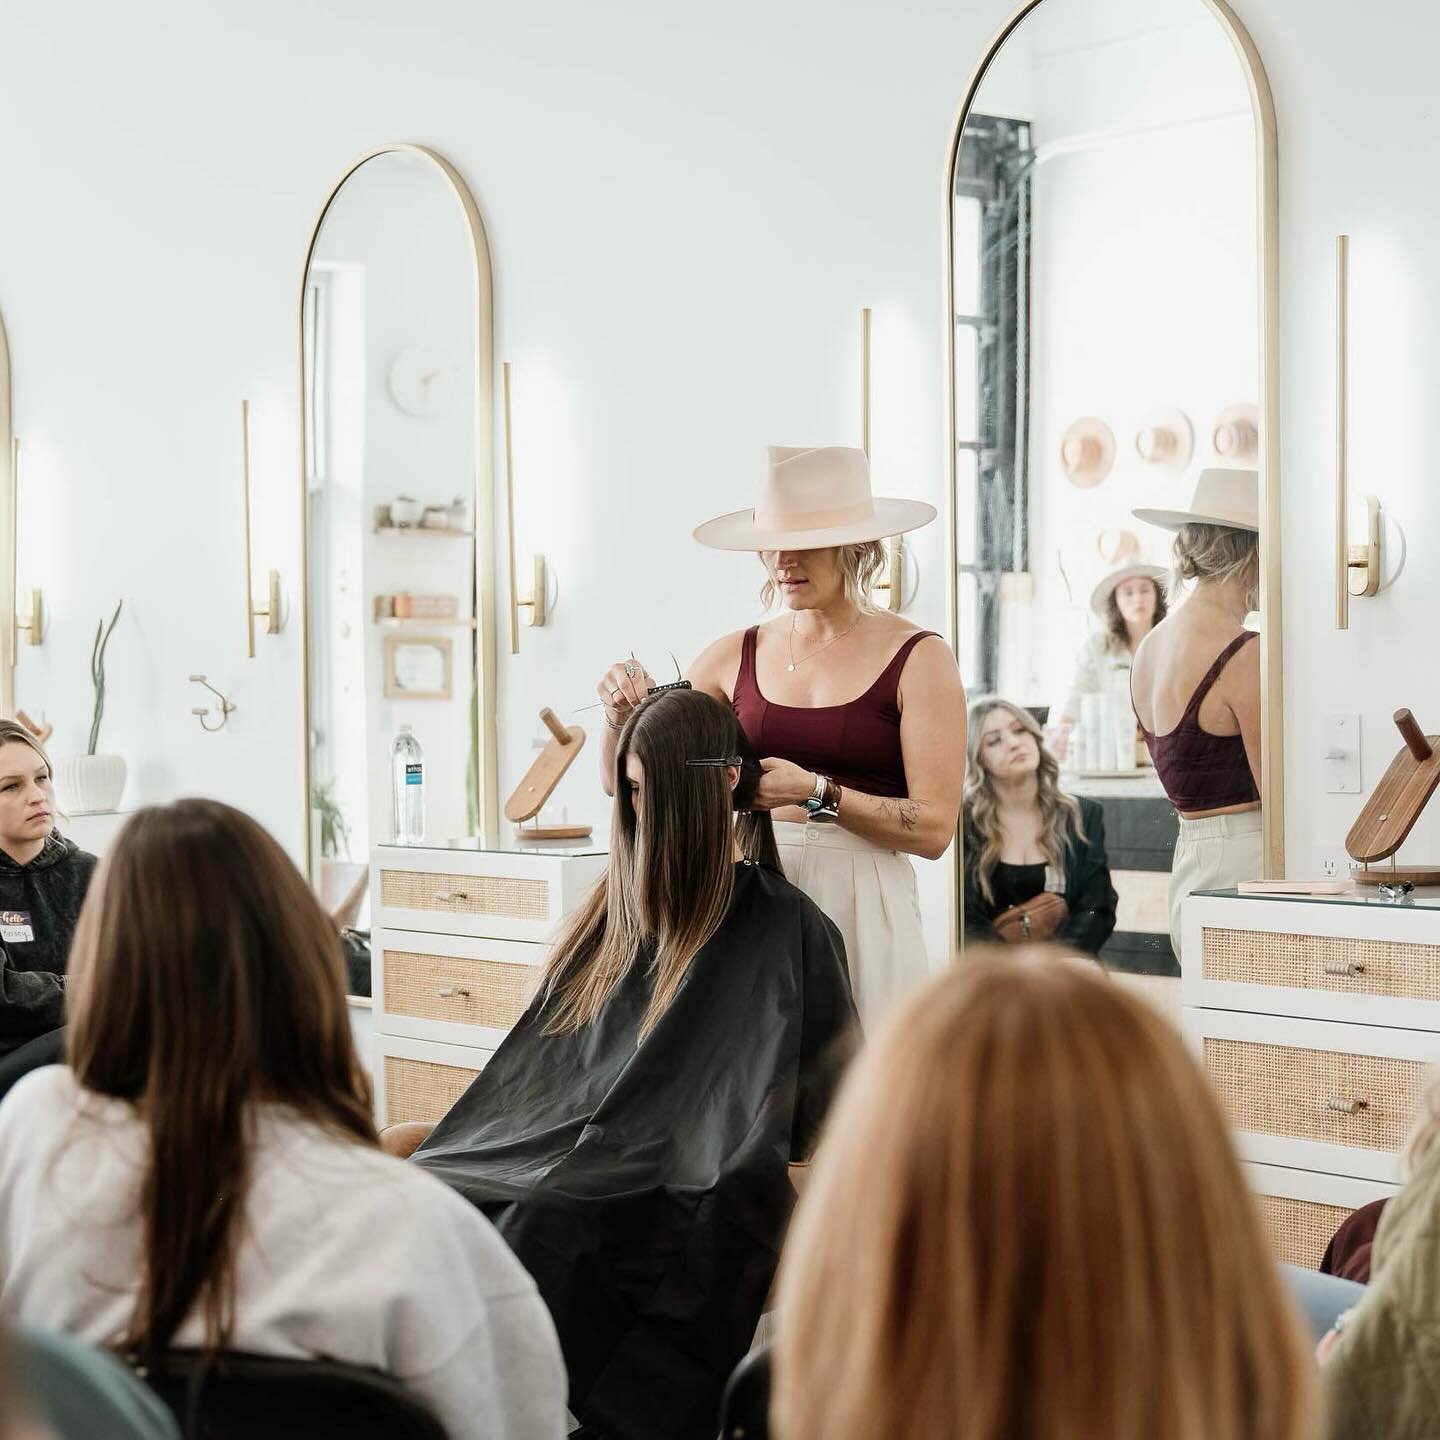 What does education look like at Sunbeam? 

☀️ An intimate space with smaller classes so you never feel left out of the conversation.

☀️ Advanced technologies and modern placements keeping stylists on top of the latest hair trends.

☀️ Goodie bags w